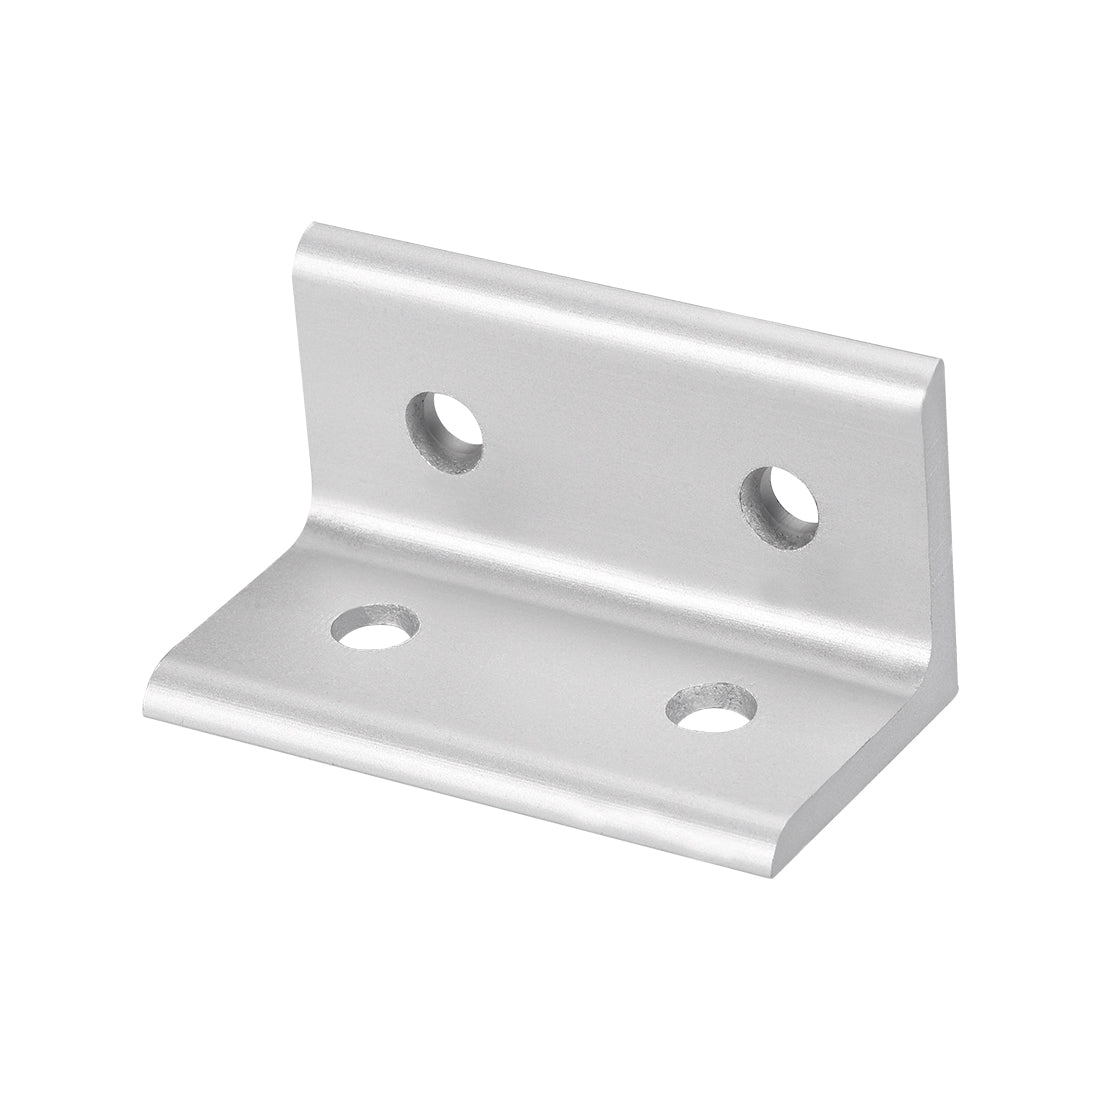 uxcell Uxcell 3060 Inside Corner Bracket for 3030 Series Aluminum Extrusion Profile with Slot 8mm, 2 Pcs